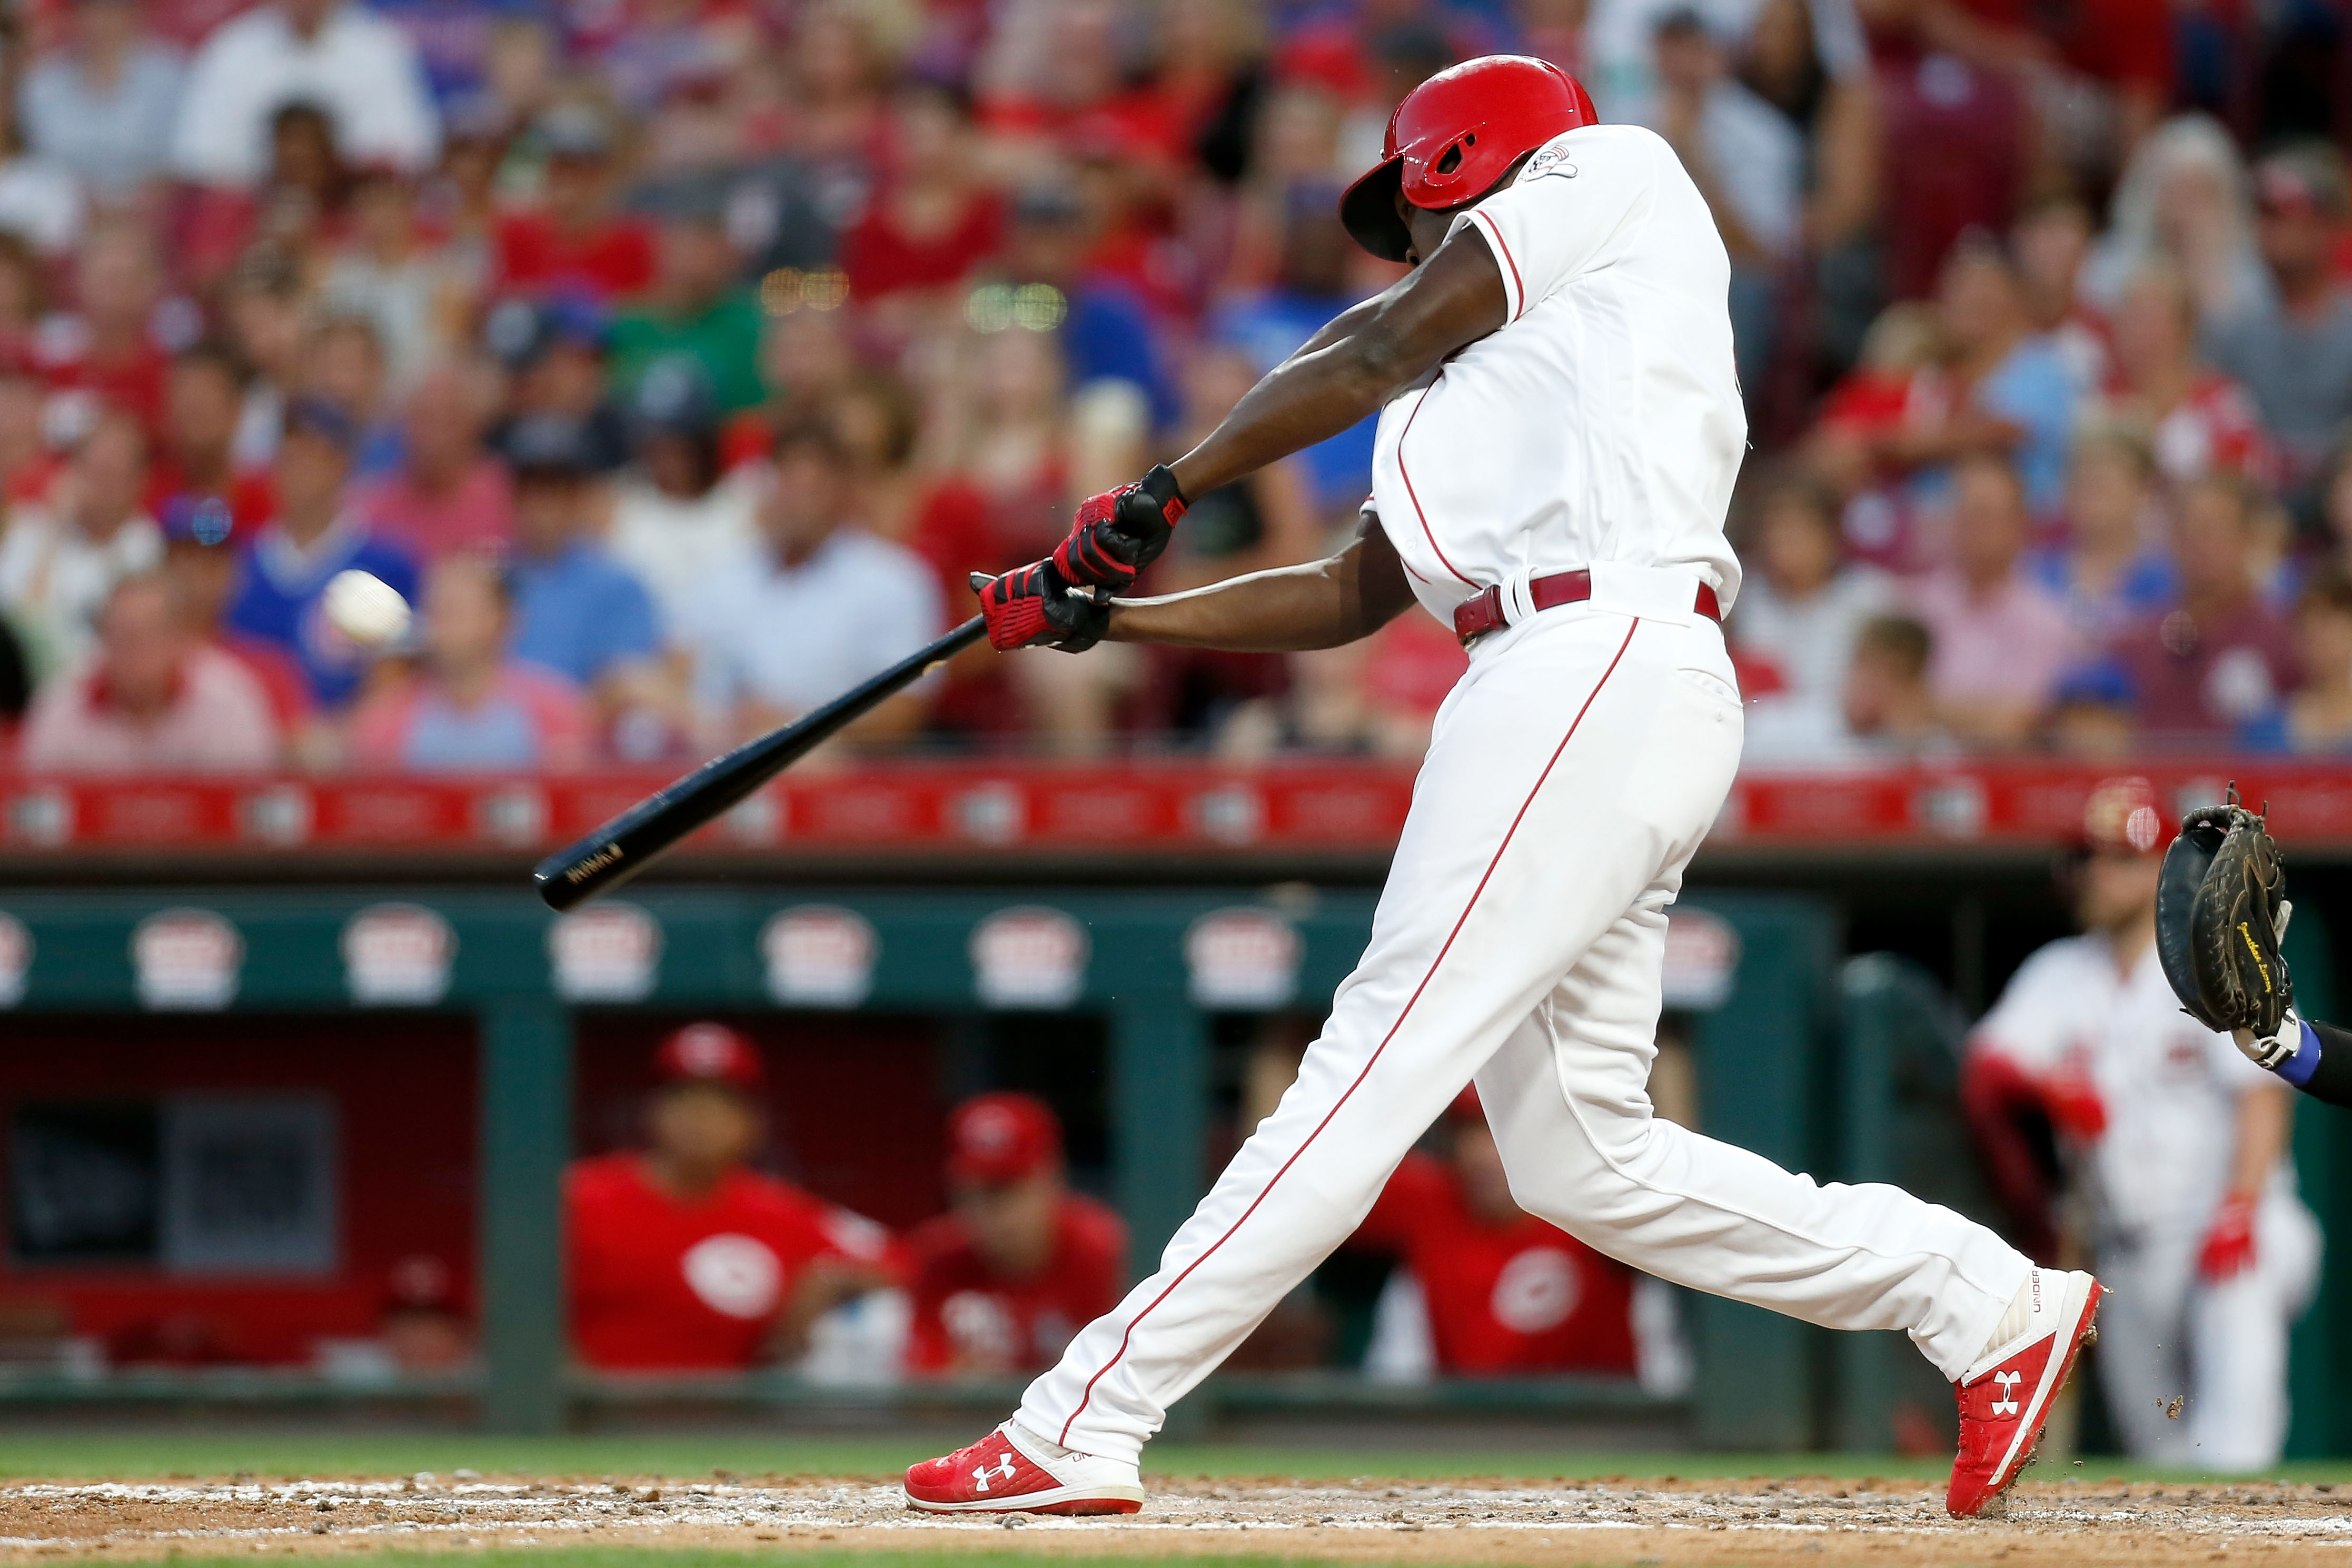 Reds prospect Aristides Aquino homers twice for Louisville on